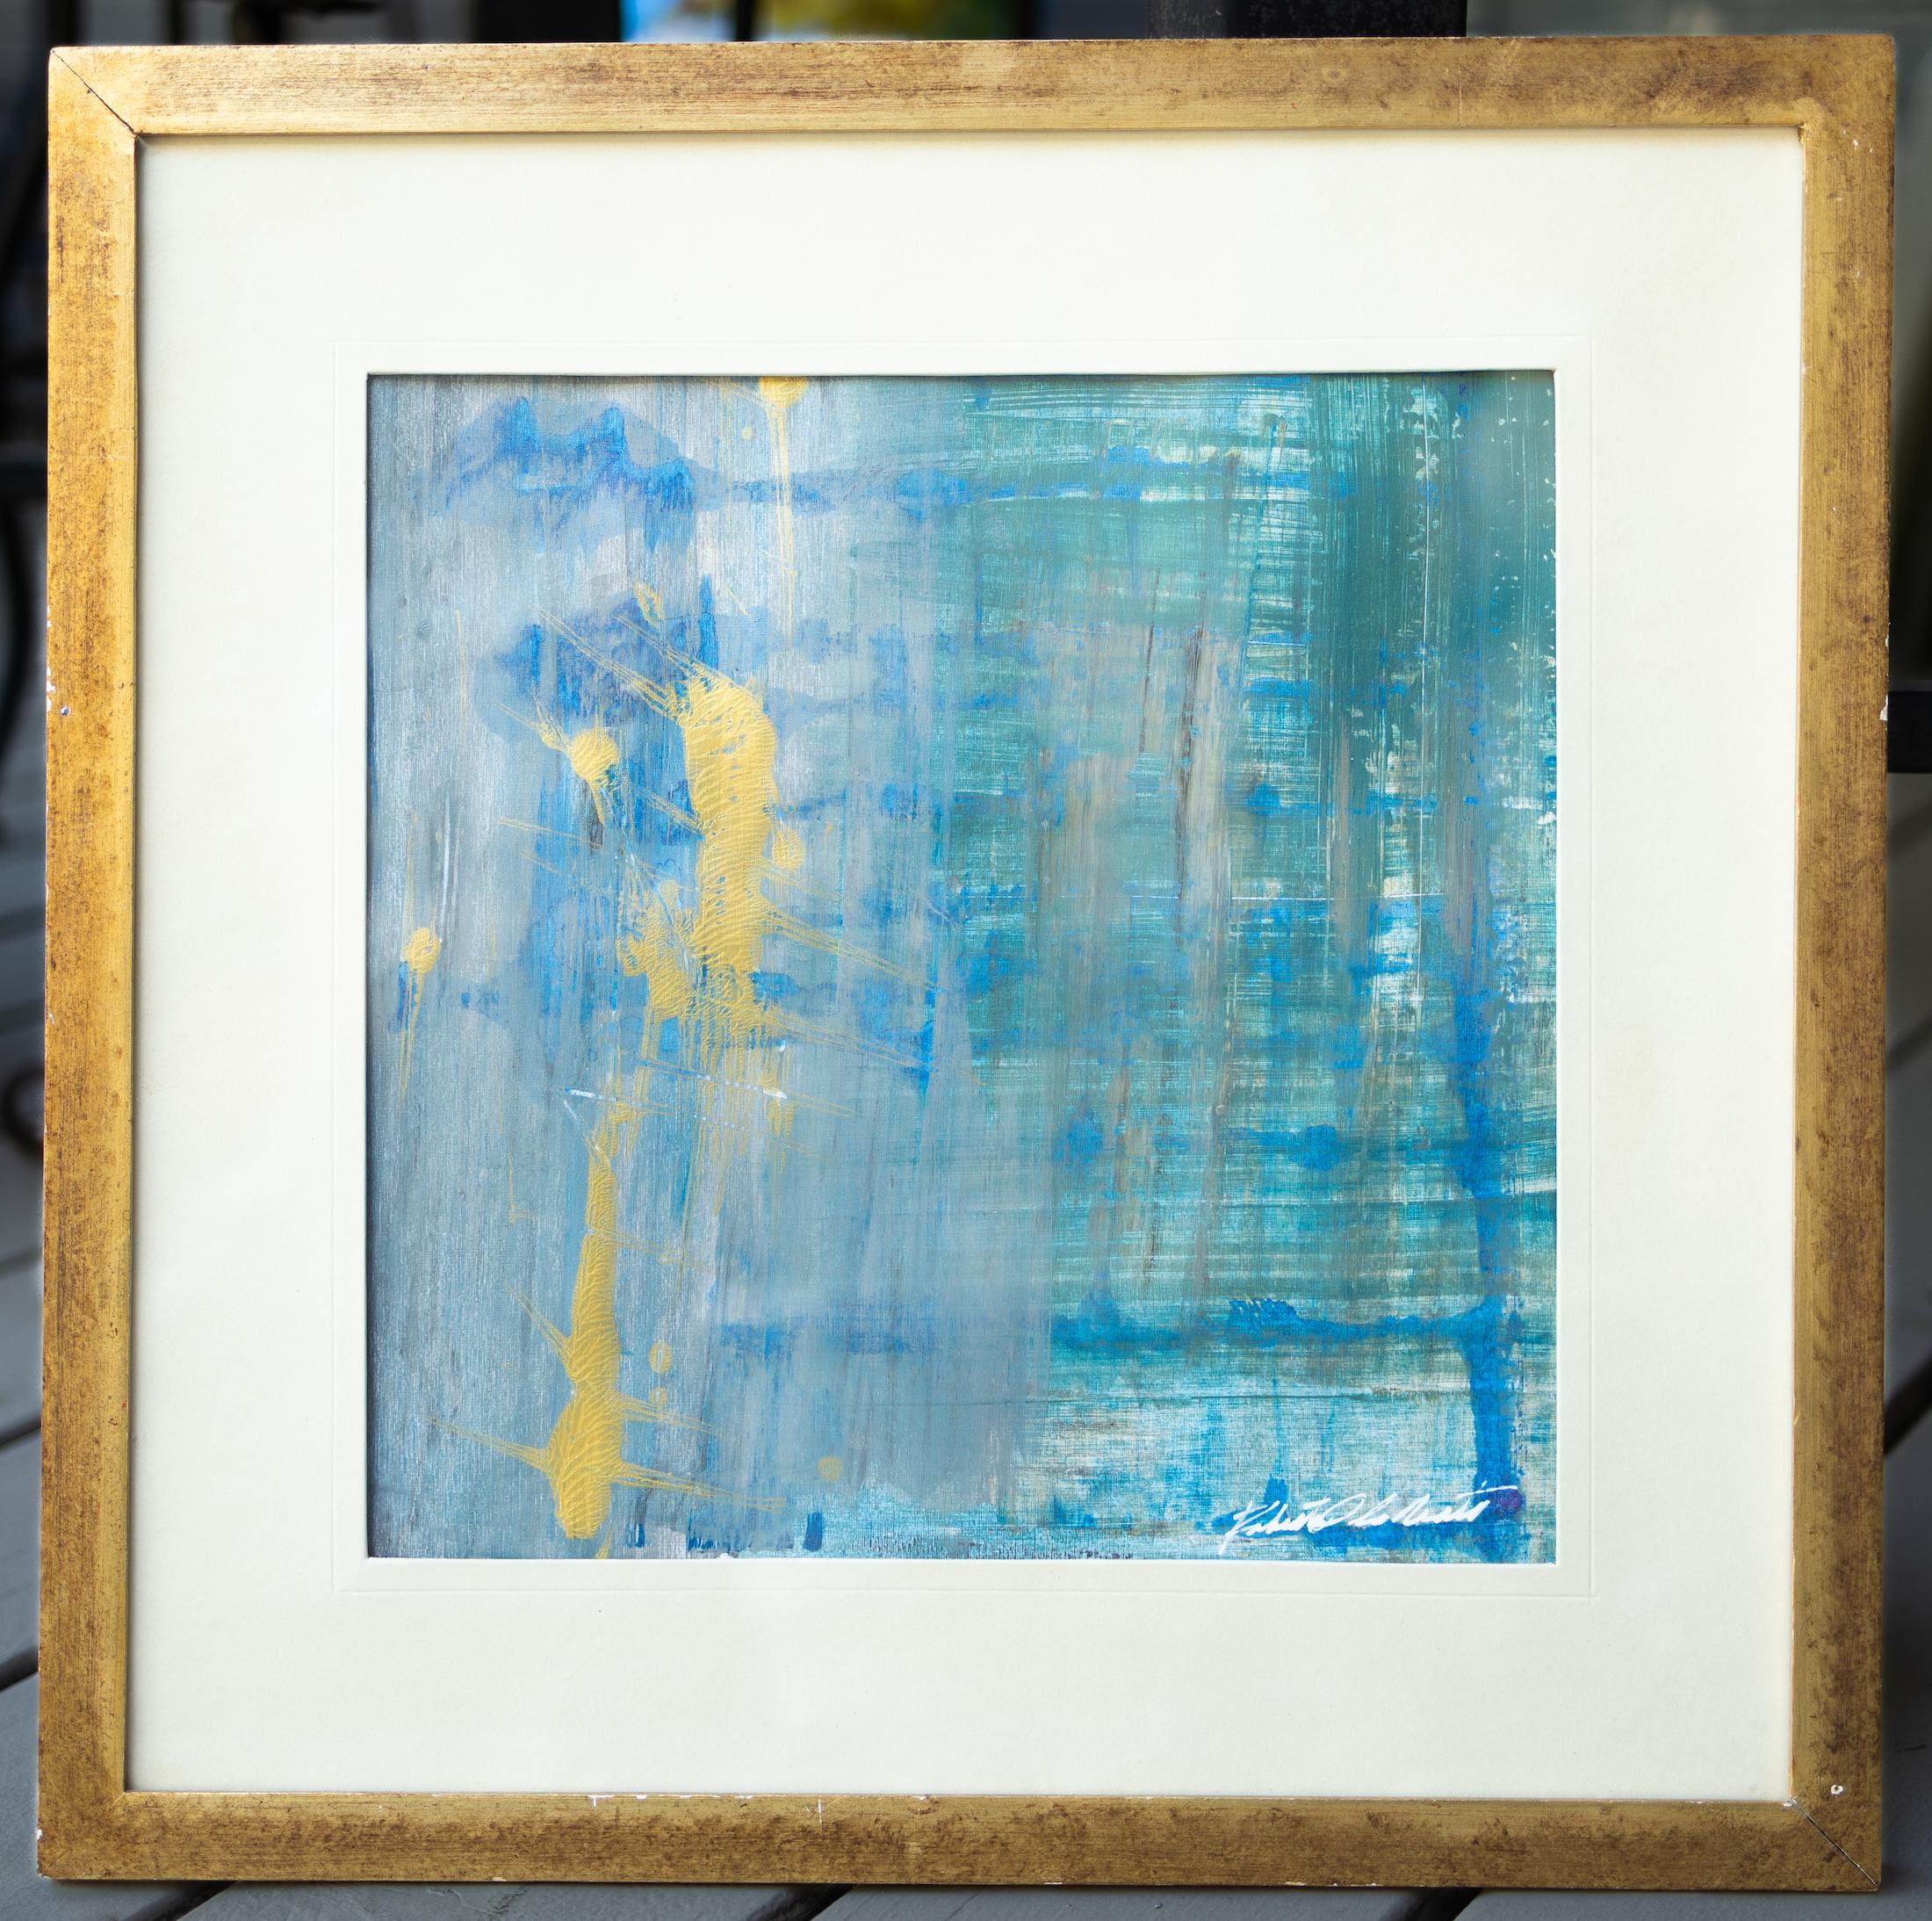 Blue and Green Gestural Abstract with Yellow Accents - Painting by Roberto D la Renta